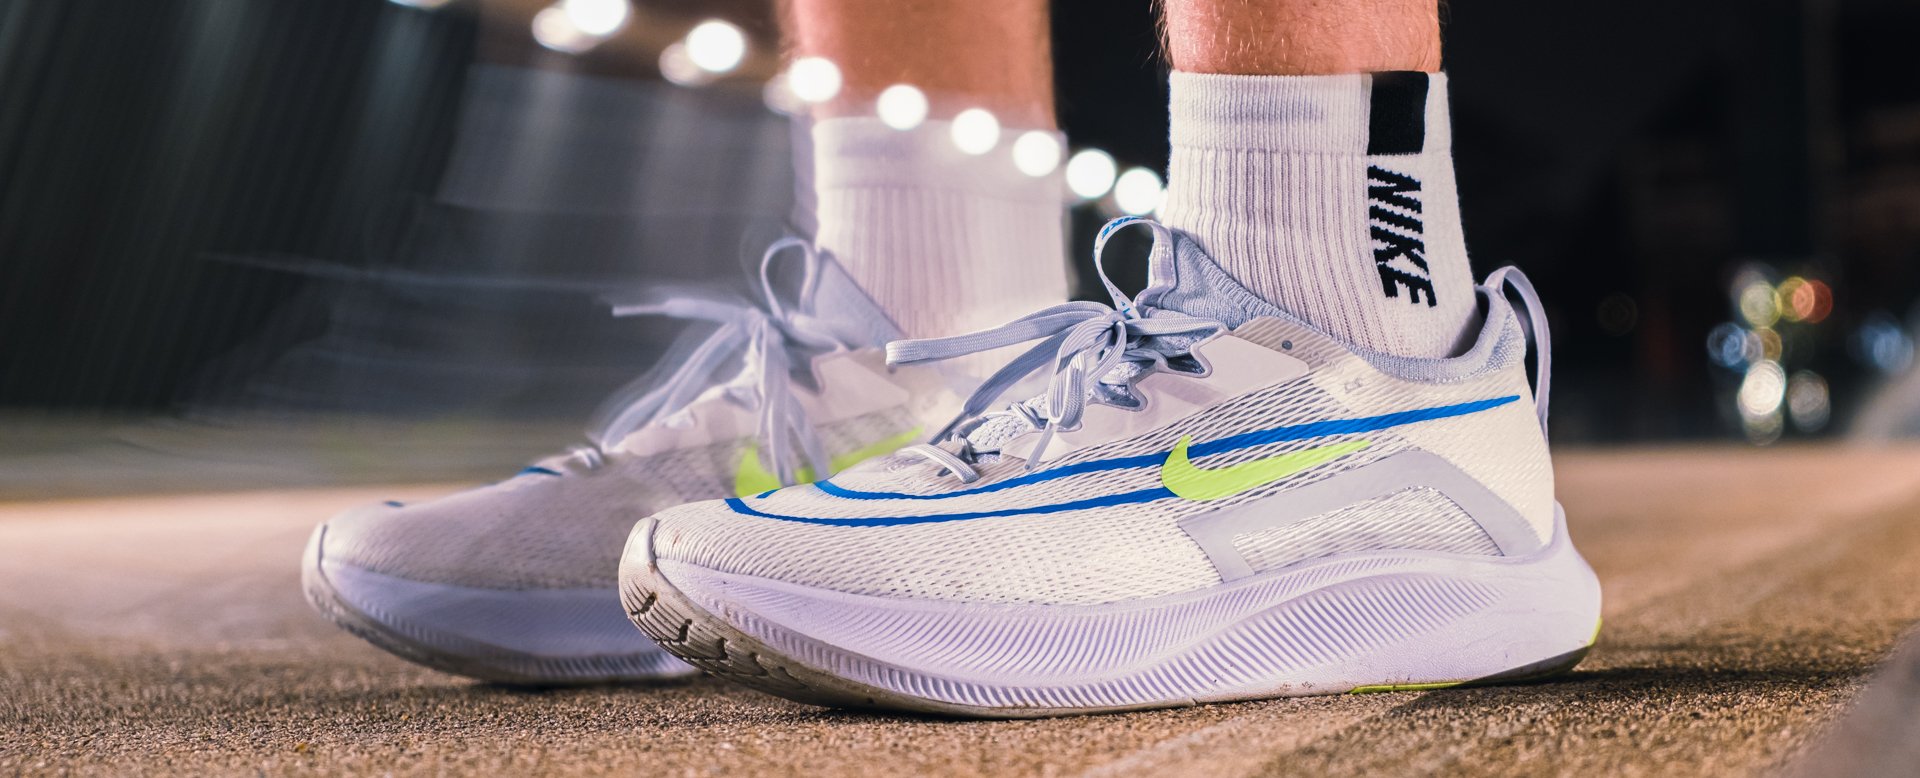 Nike Zoom Fly 4 - A Vaporfly for the daily miles - Inspiration